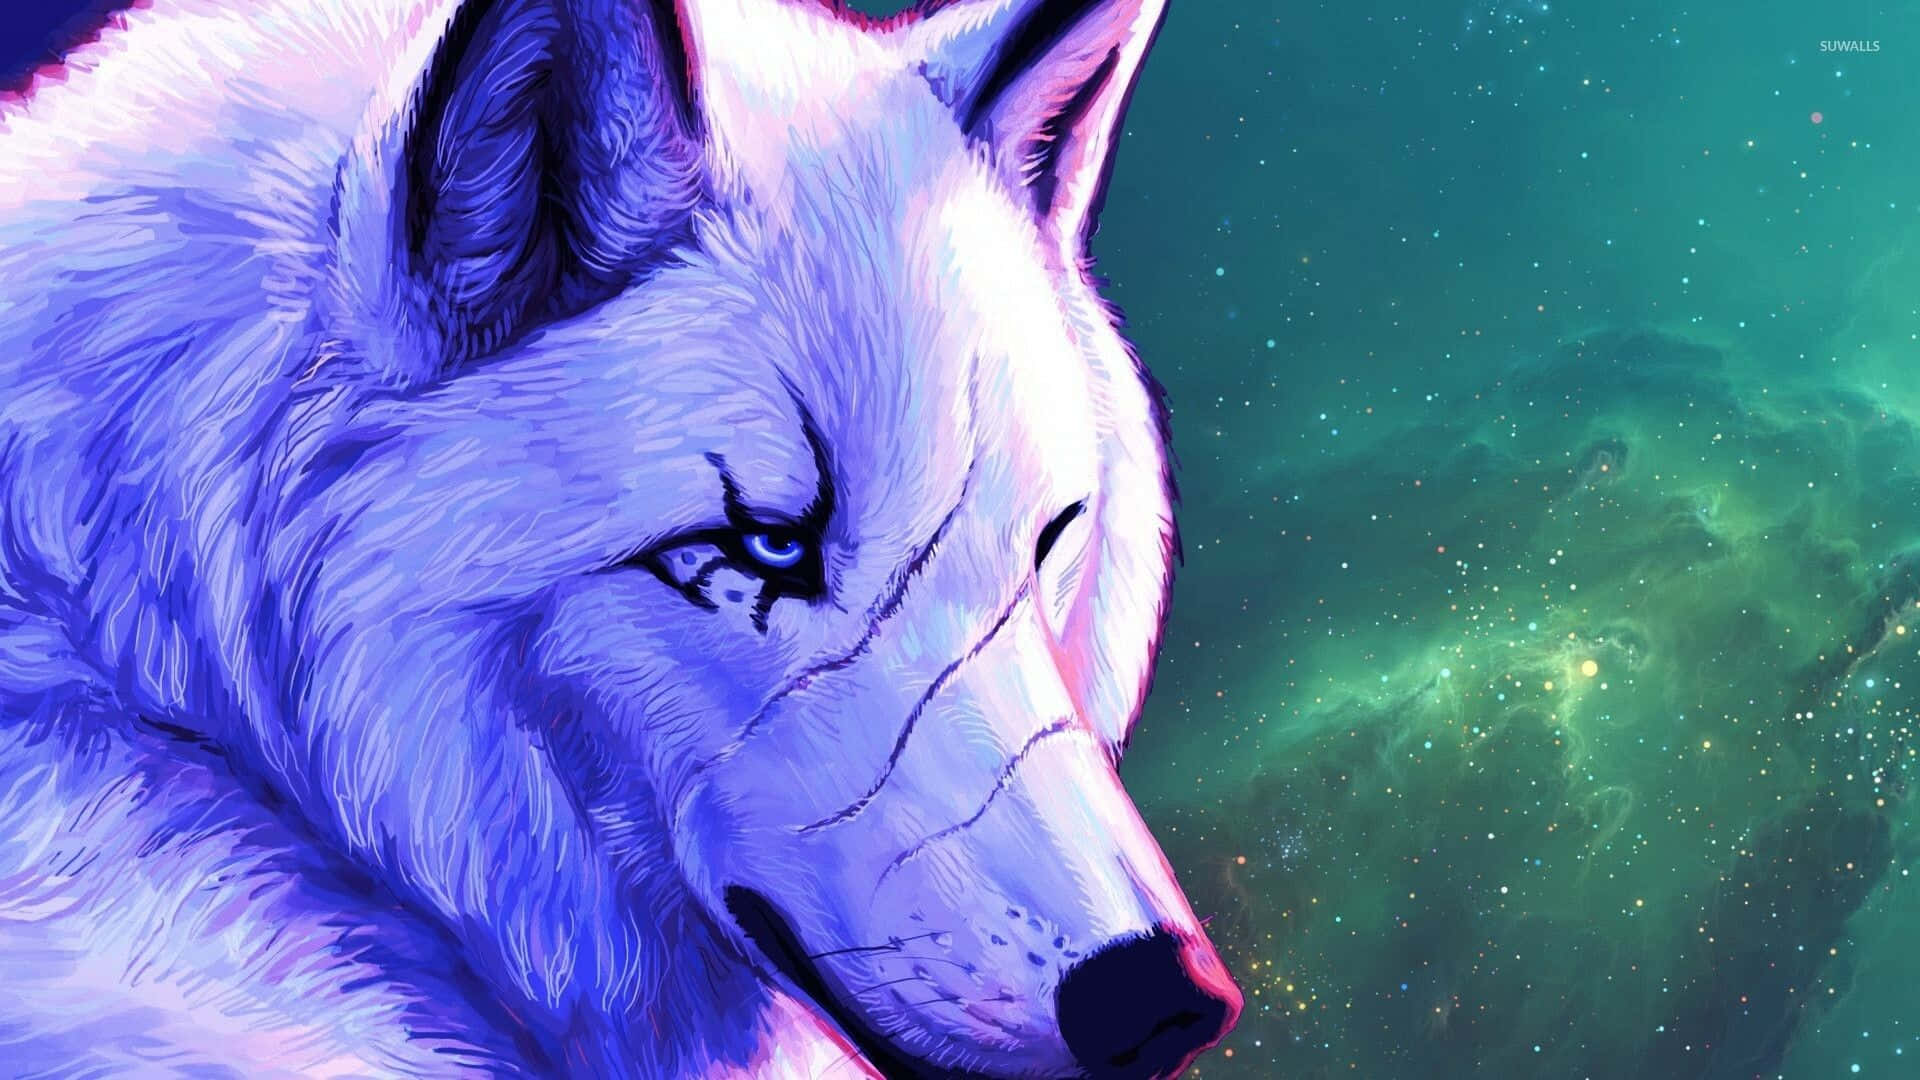 Majestic Lone Wolf in the Moonlight Wallpaper